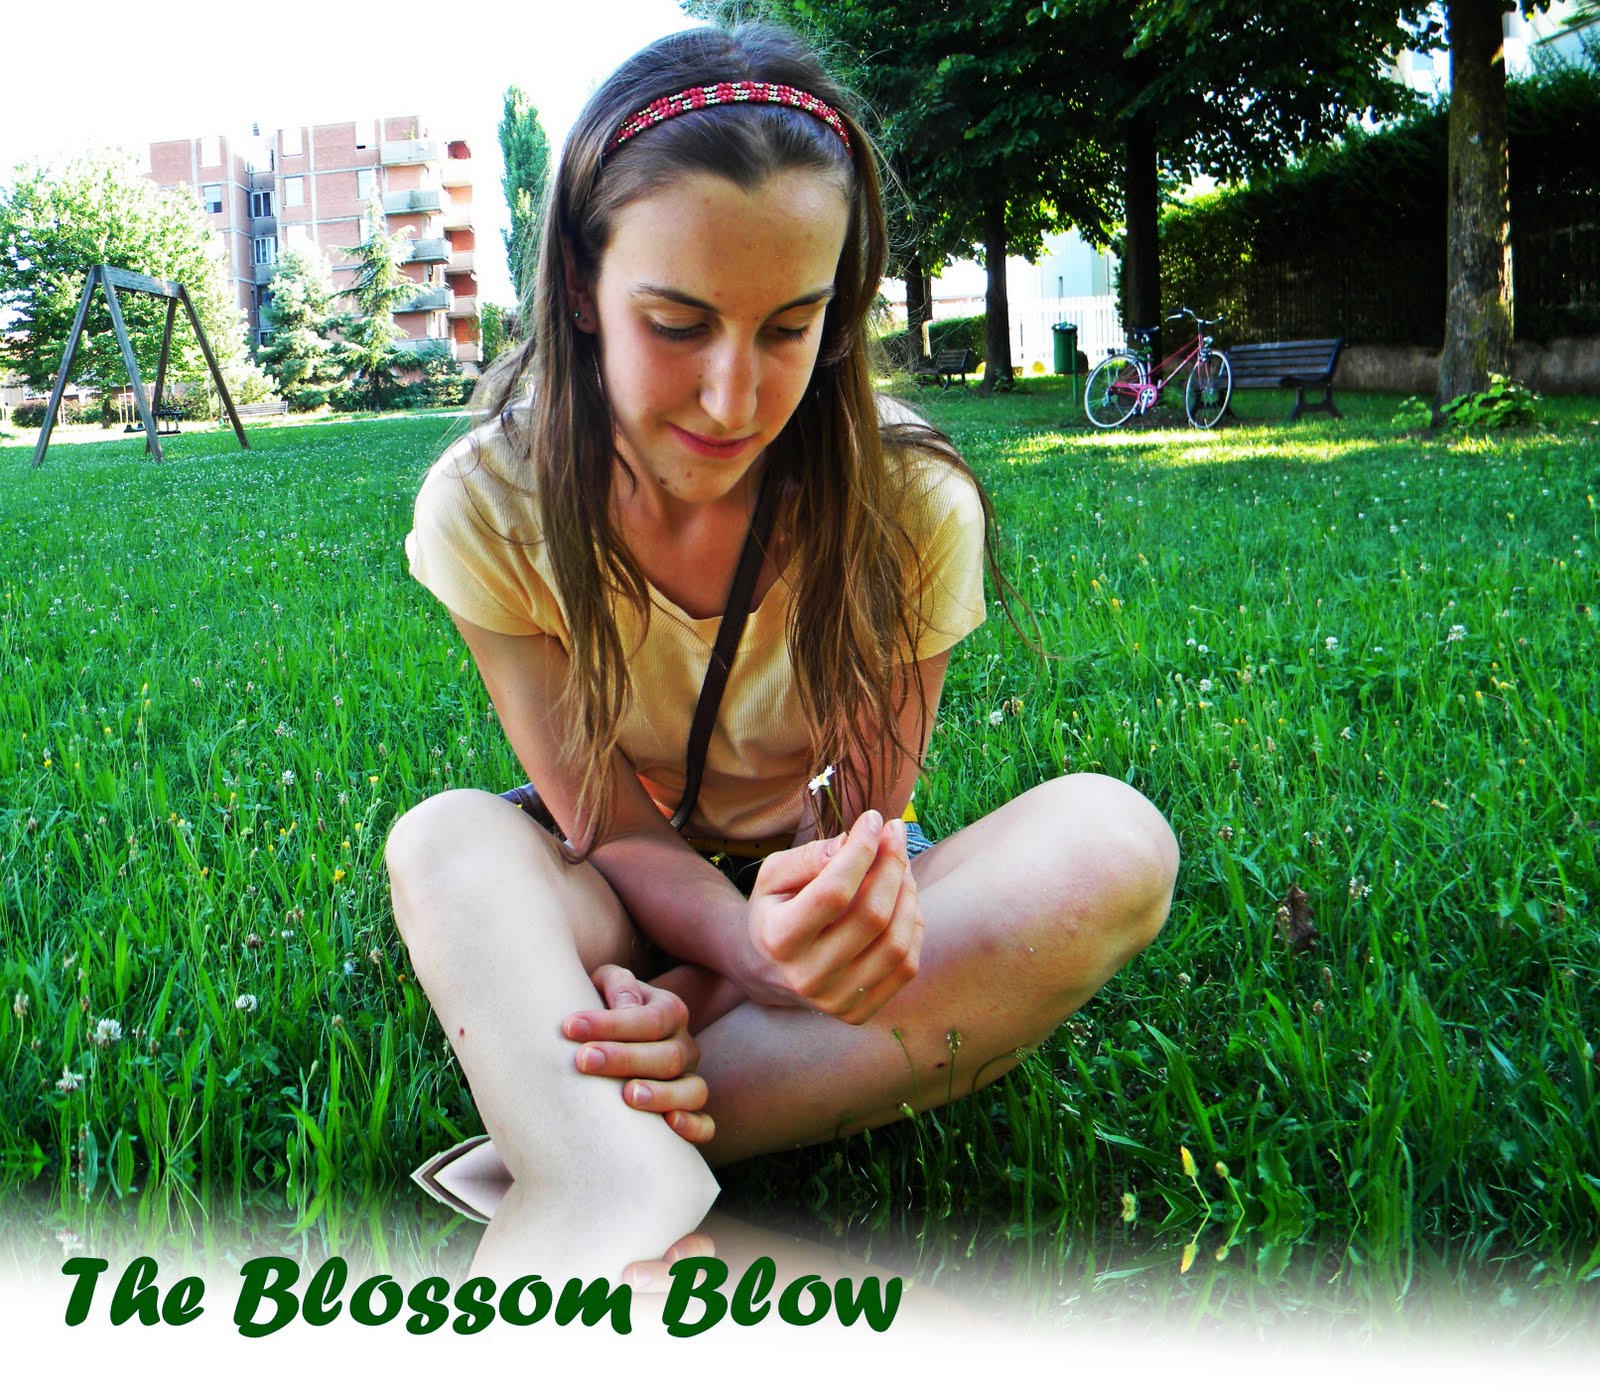 The Blossom Blow